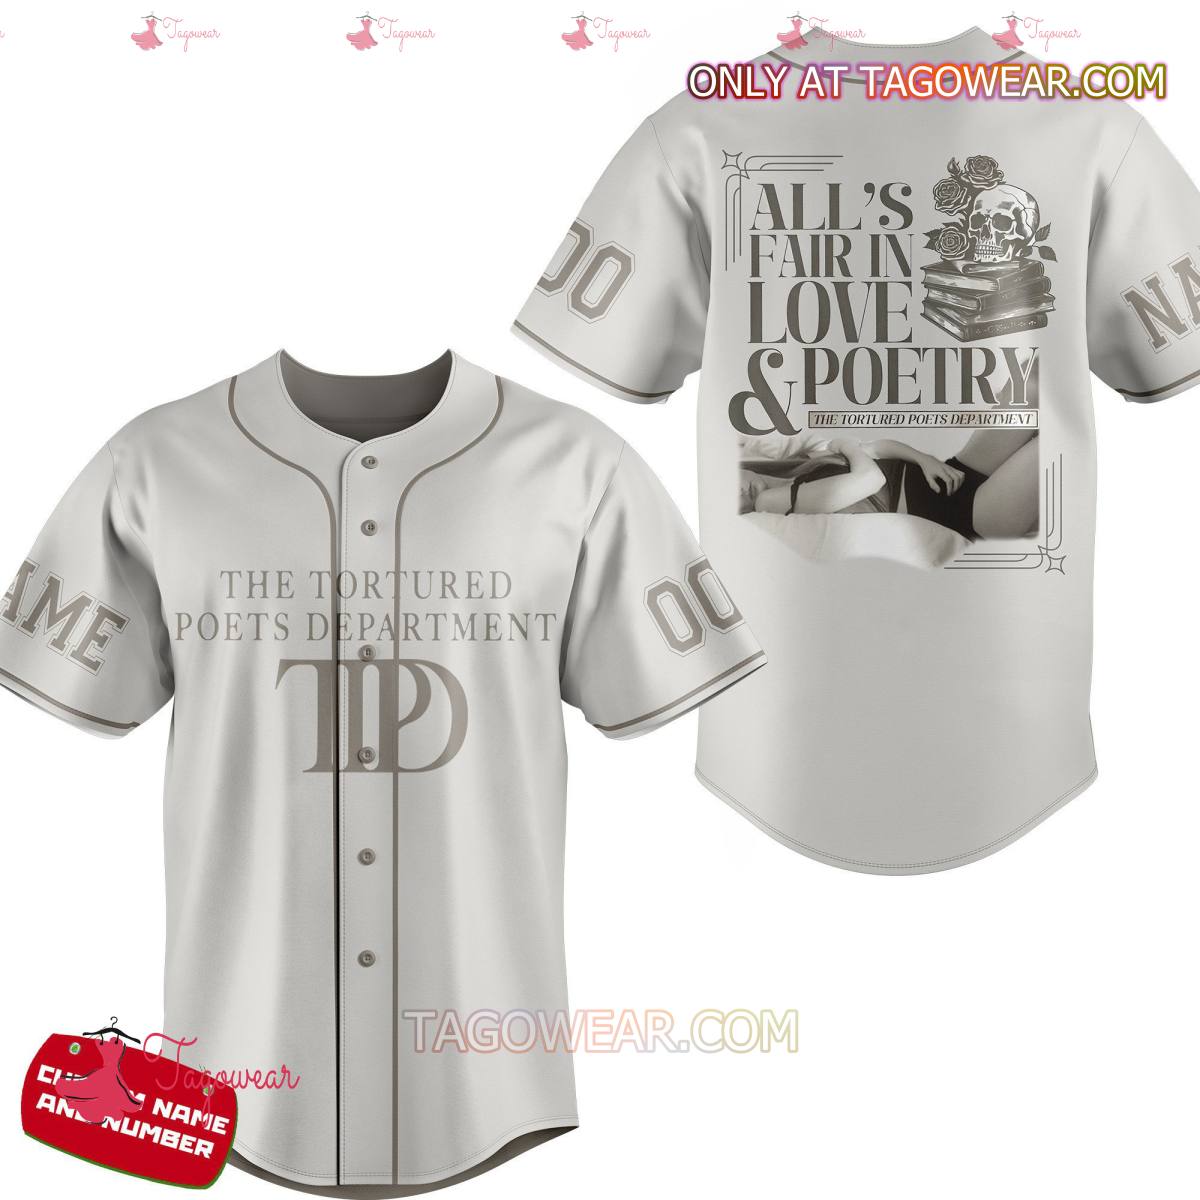 Taylor Swift The Tortured Poets Department All's Fair In Love And Poetry Personalized Baseball Jersey